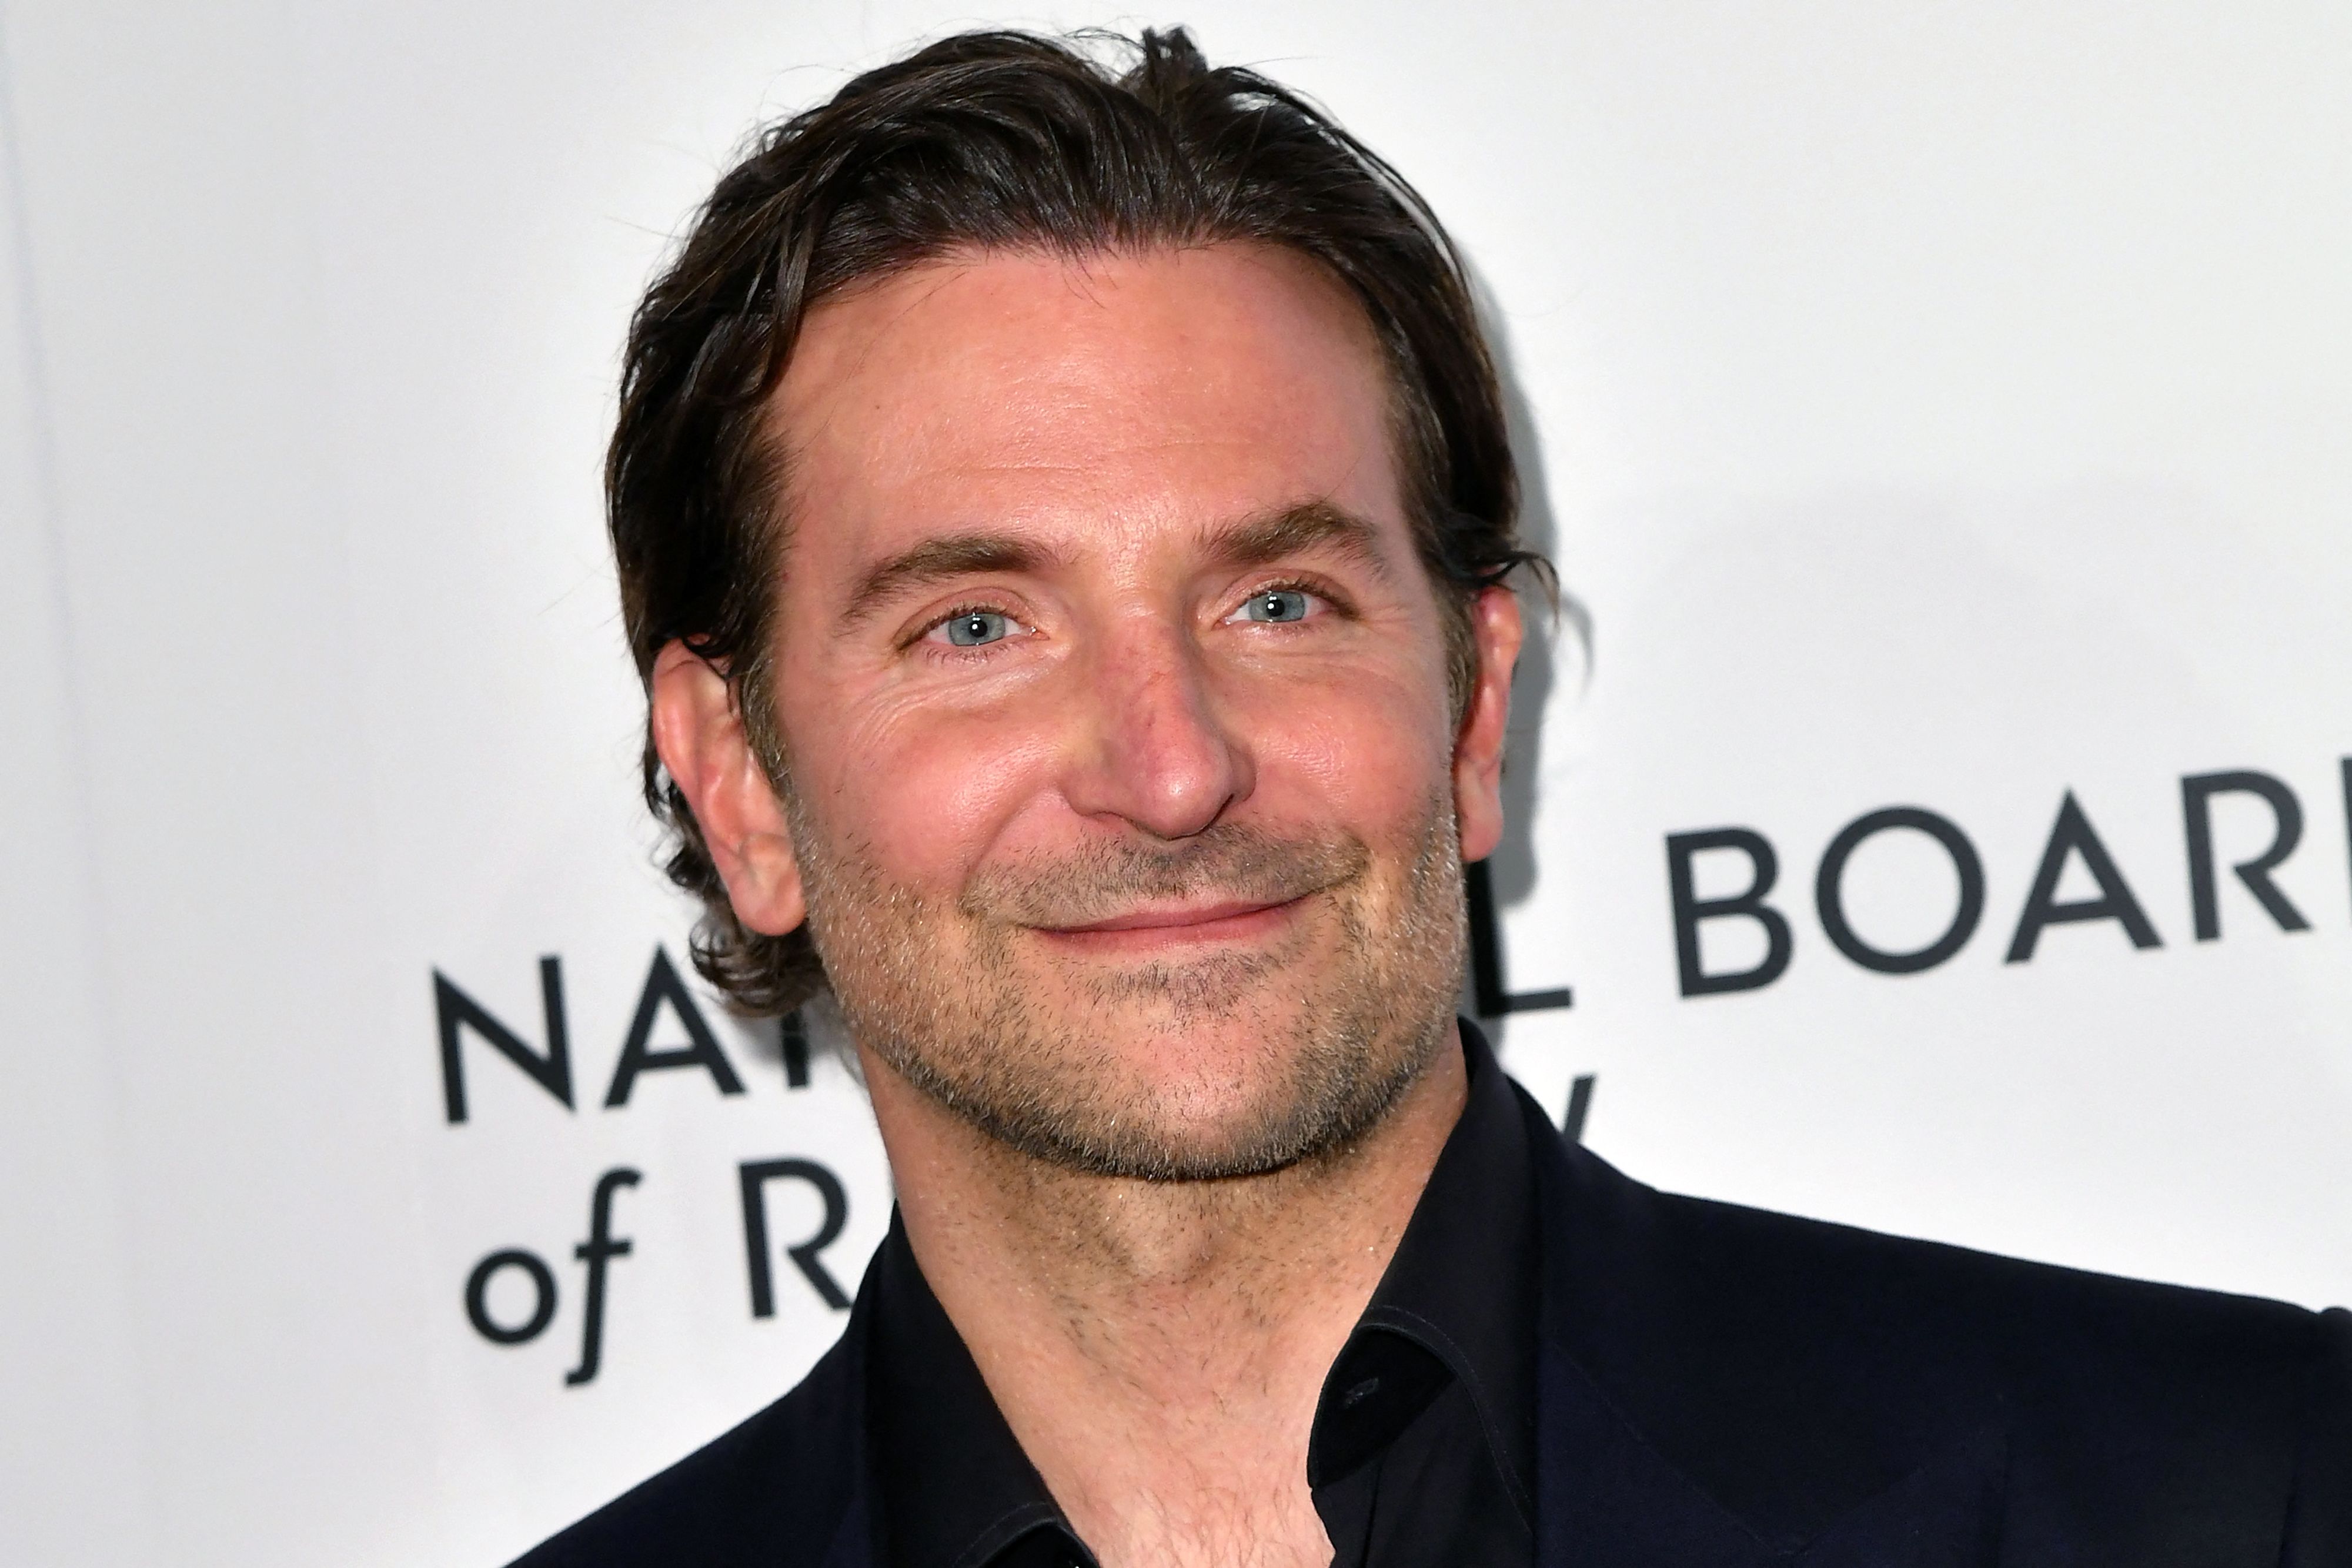 Bradley Cooper at the National Board of Review Annual Awards Gala on March 15, 2022 | Source: Getty Images